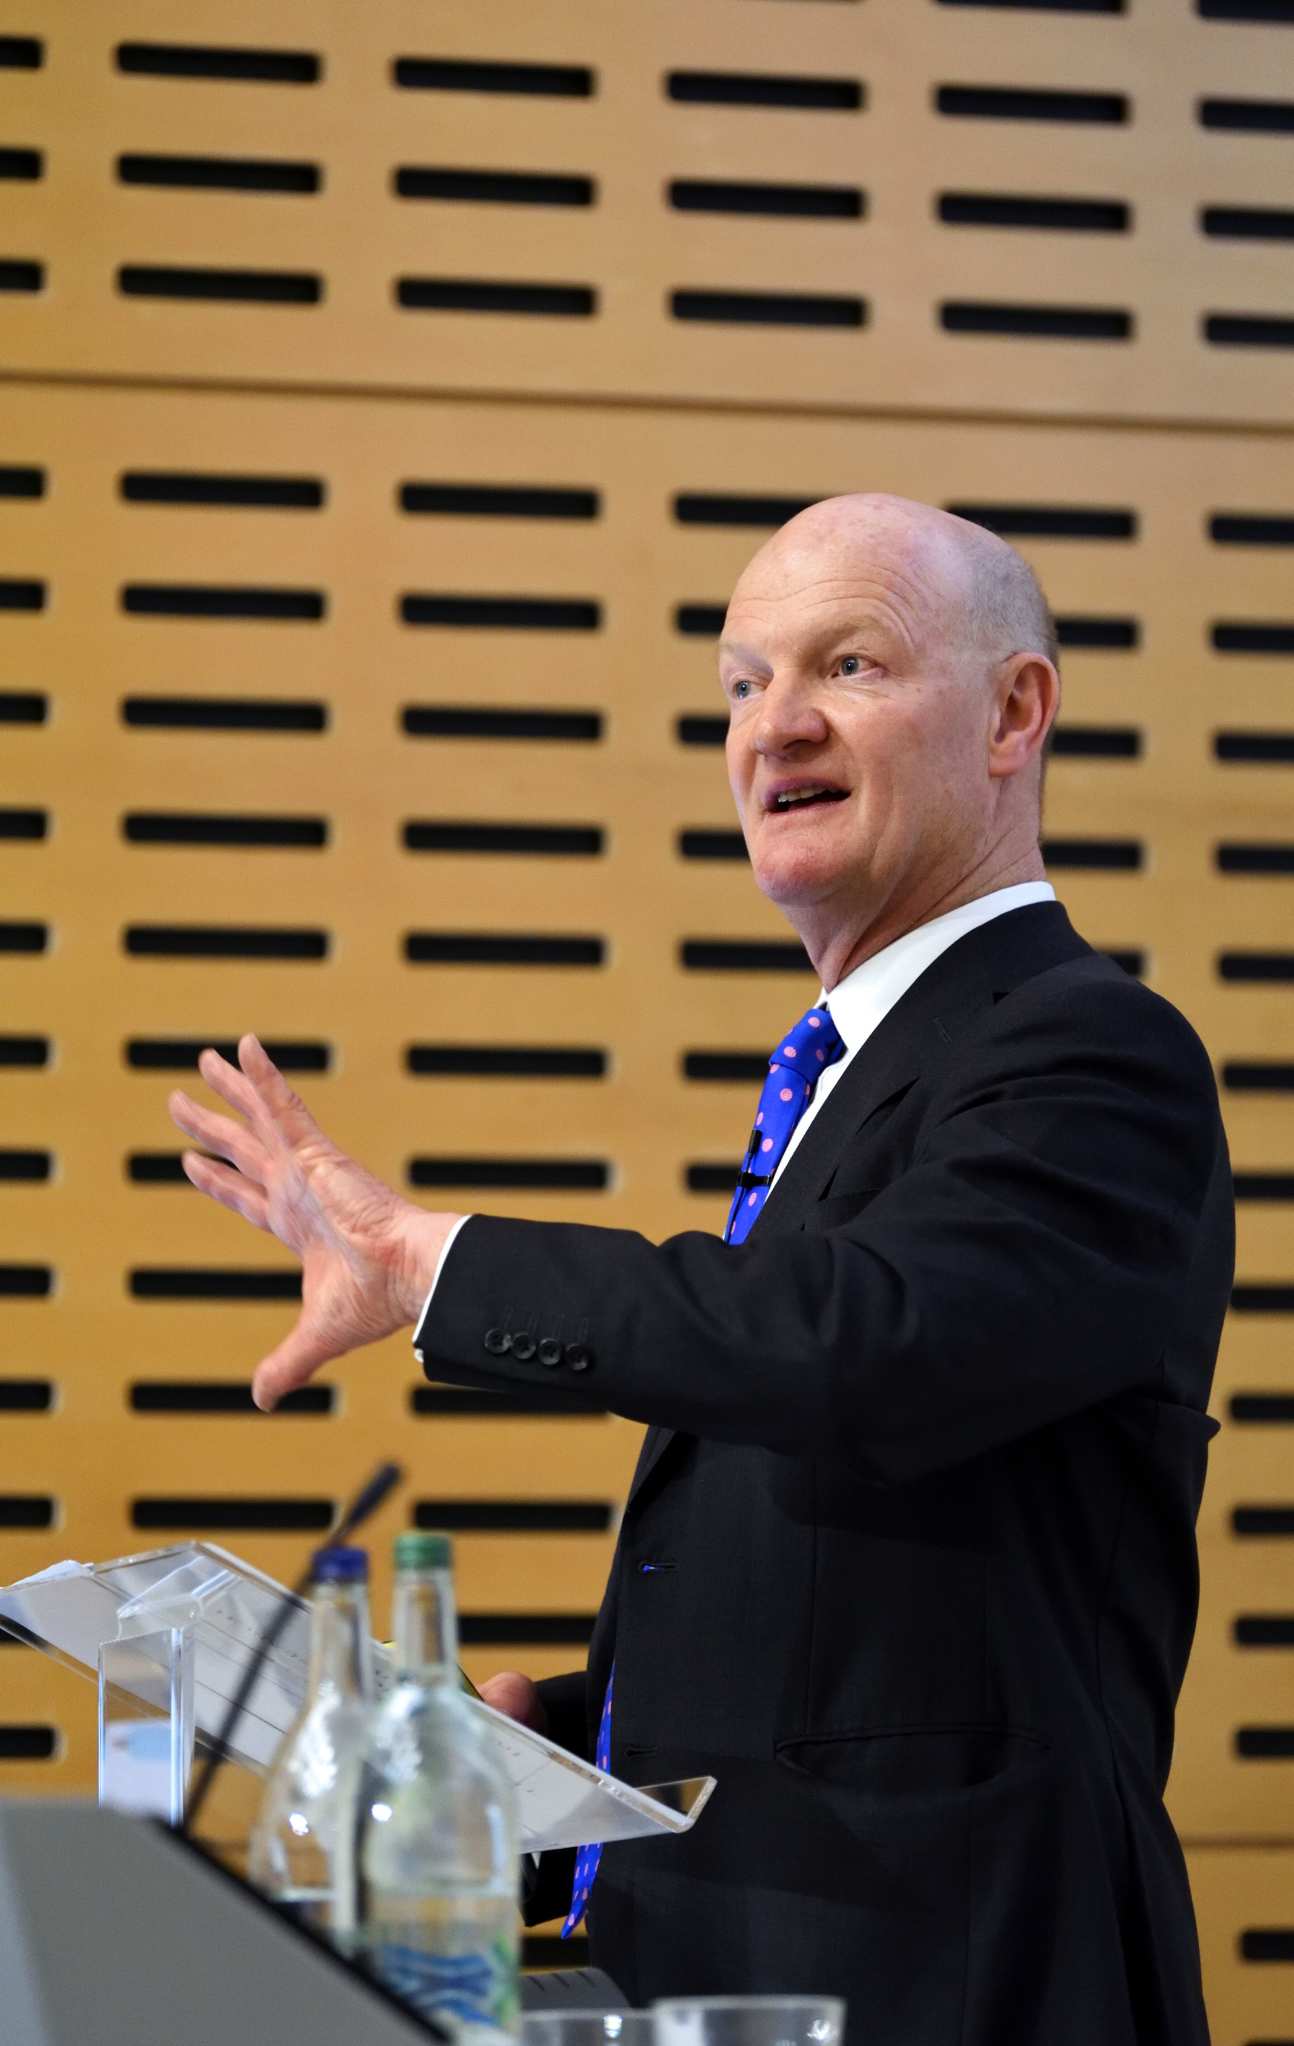 Lord David Willetts speaking at the lecture